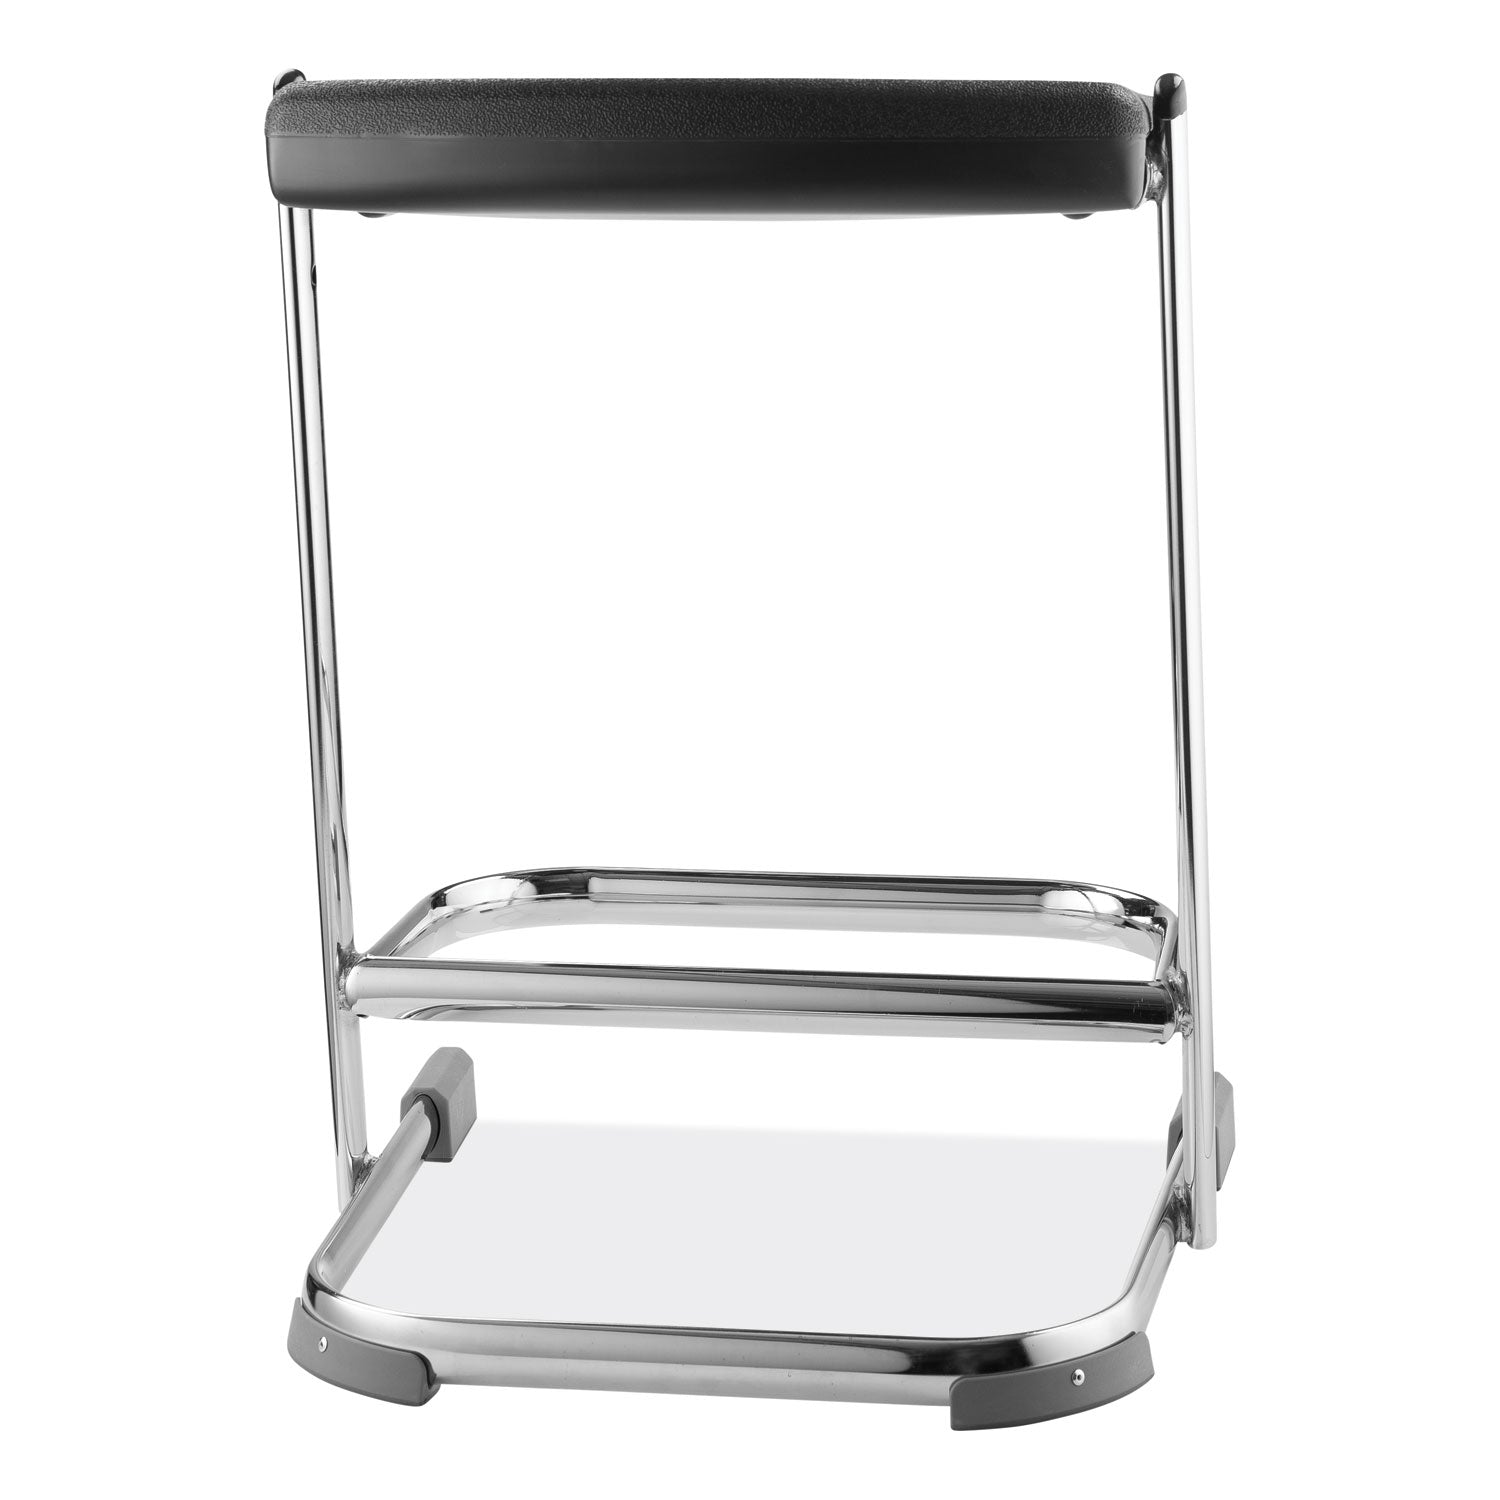 6600-series-elephant-z-stool-backless-supports-up-to-500lb-22-seat-height-black-seat-chrome-frameships-in-1-3-bus-days_nps6622 - 2